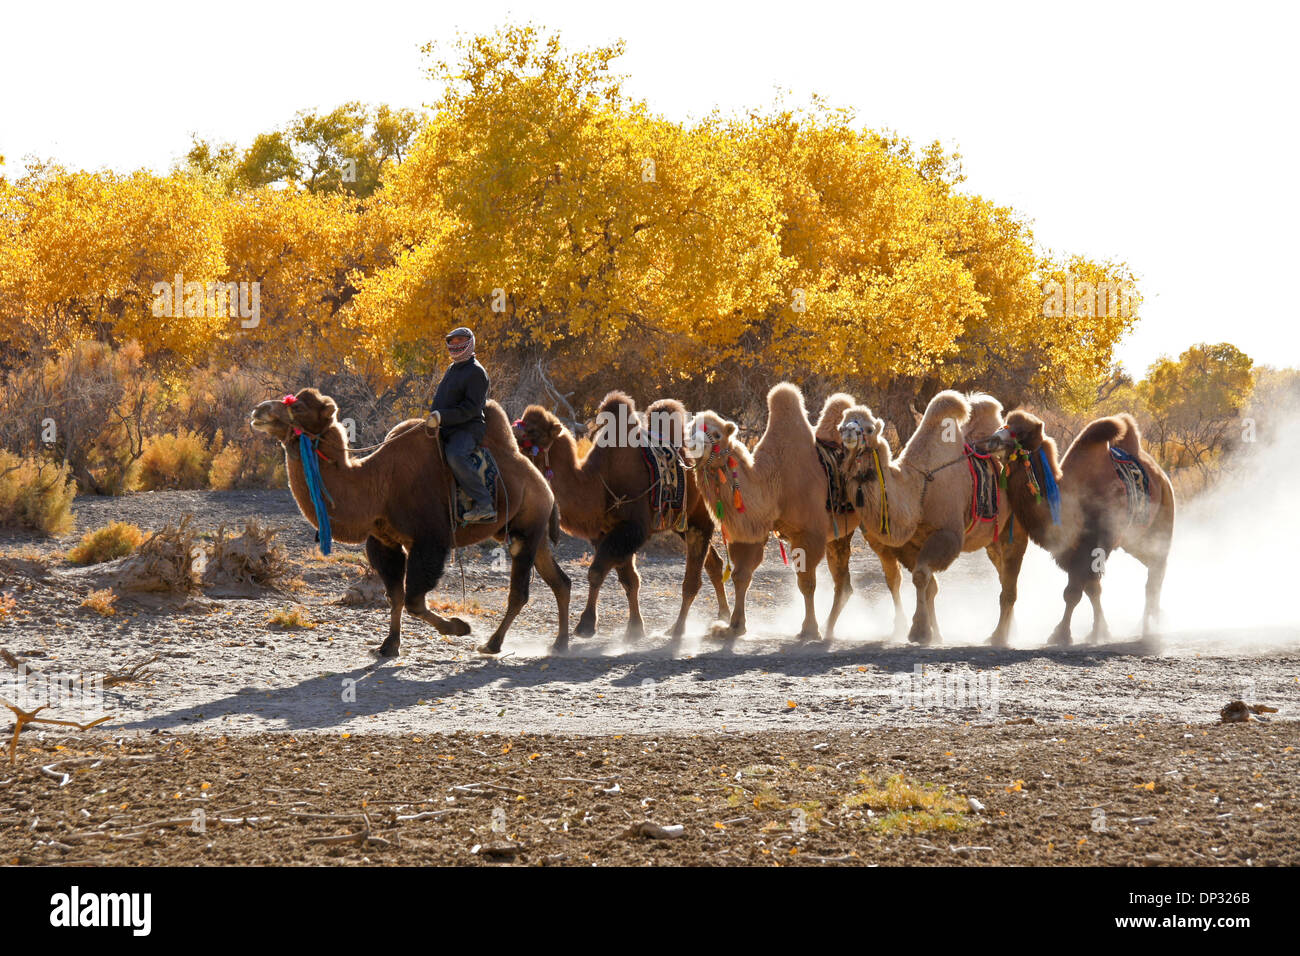 Bactrian camels and golden poplars, Ejina Qi, Inner Mongolia, China Stock Photo